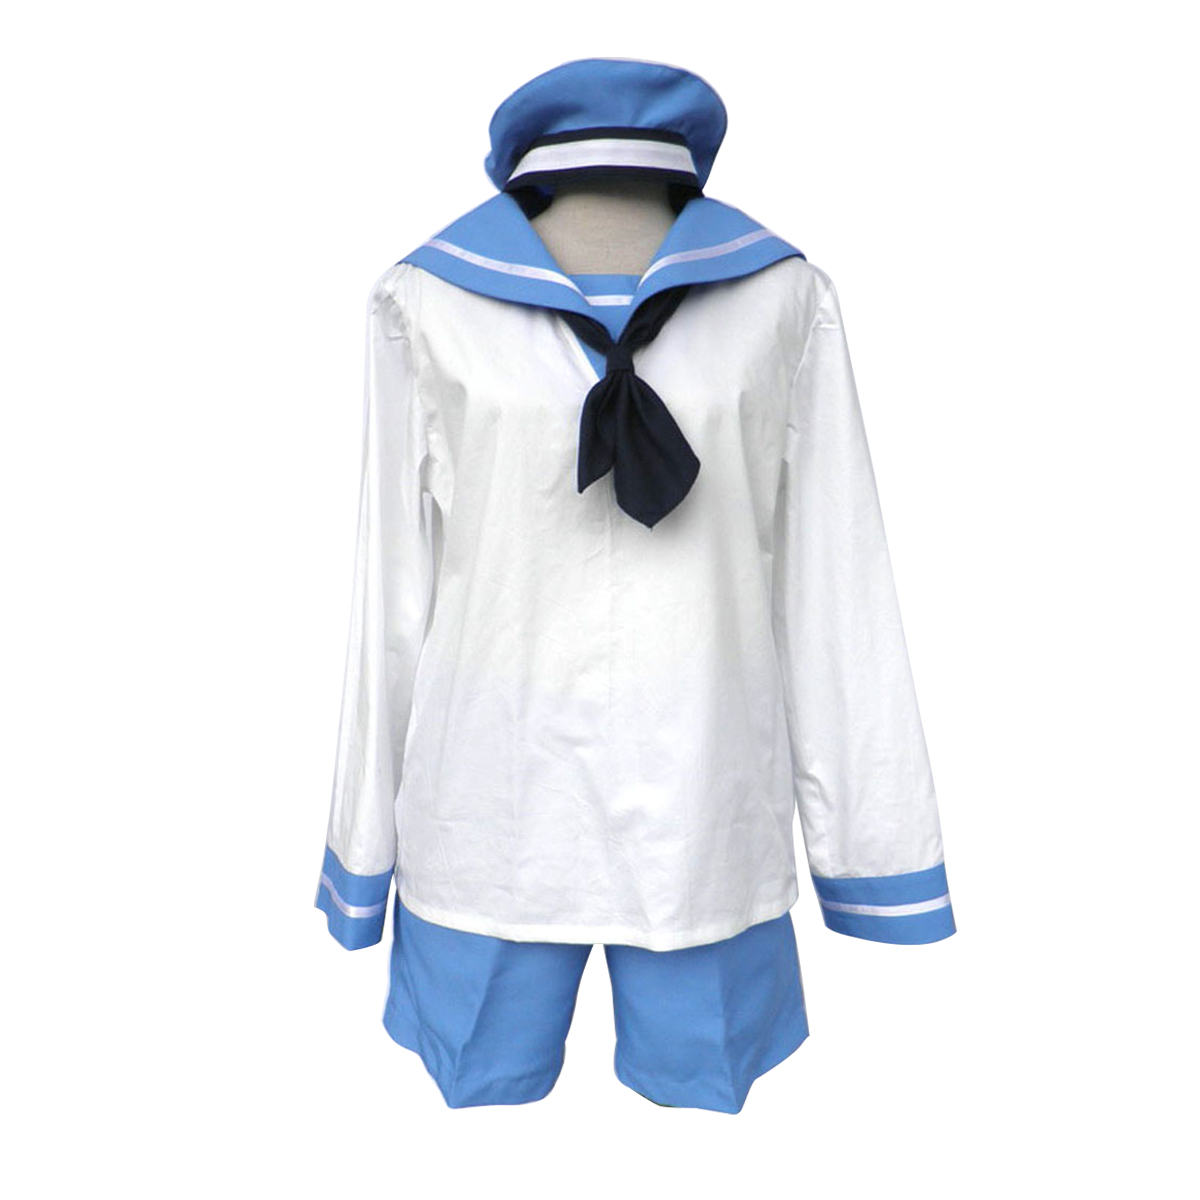 Axis Powers Hetalia North Italy Feliciano Vargas 2 Anime Cosplay Costumes Outfit